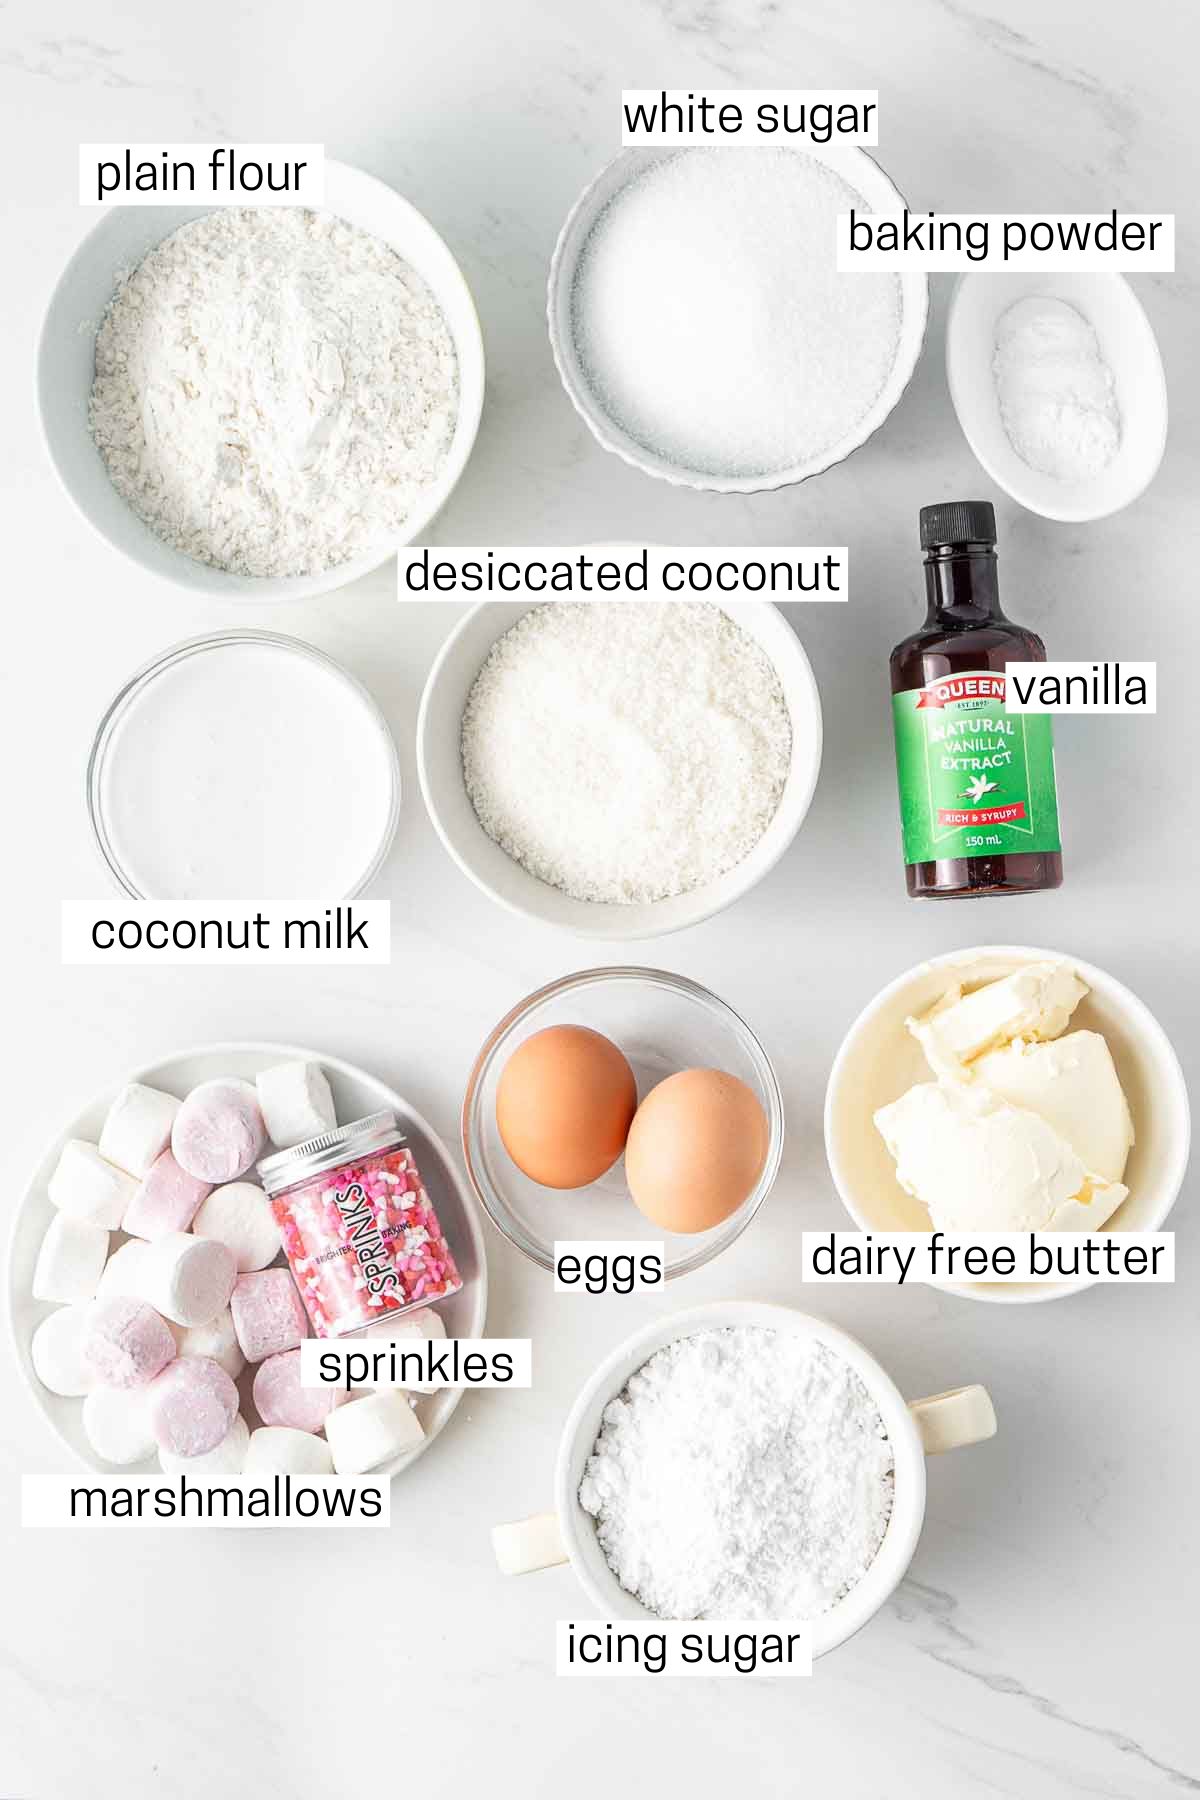 All ingredients needed to make easter bunny cupcakes laid out in small bowls.